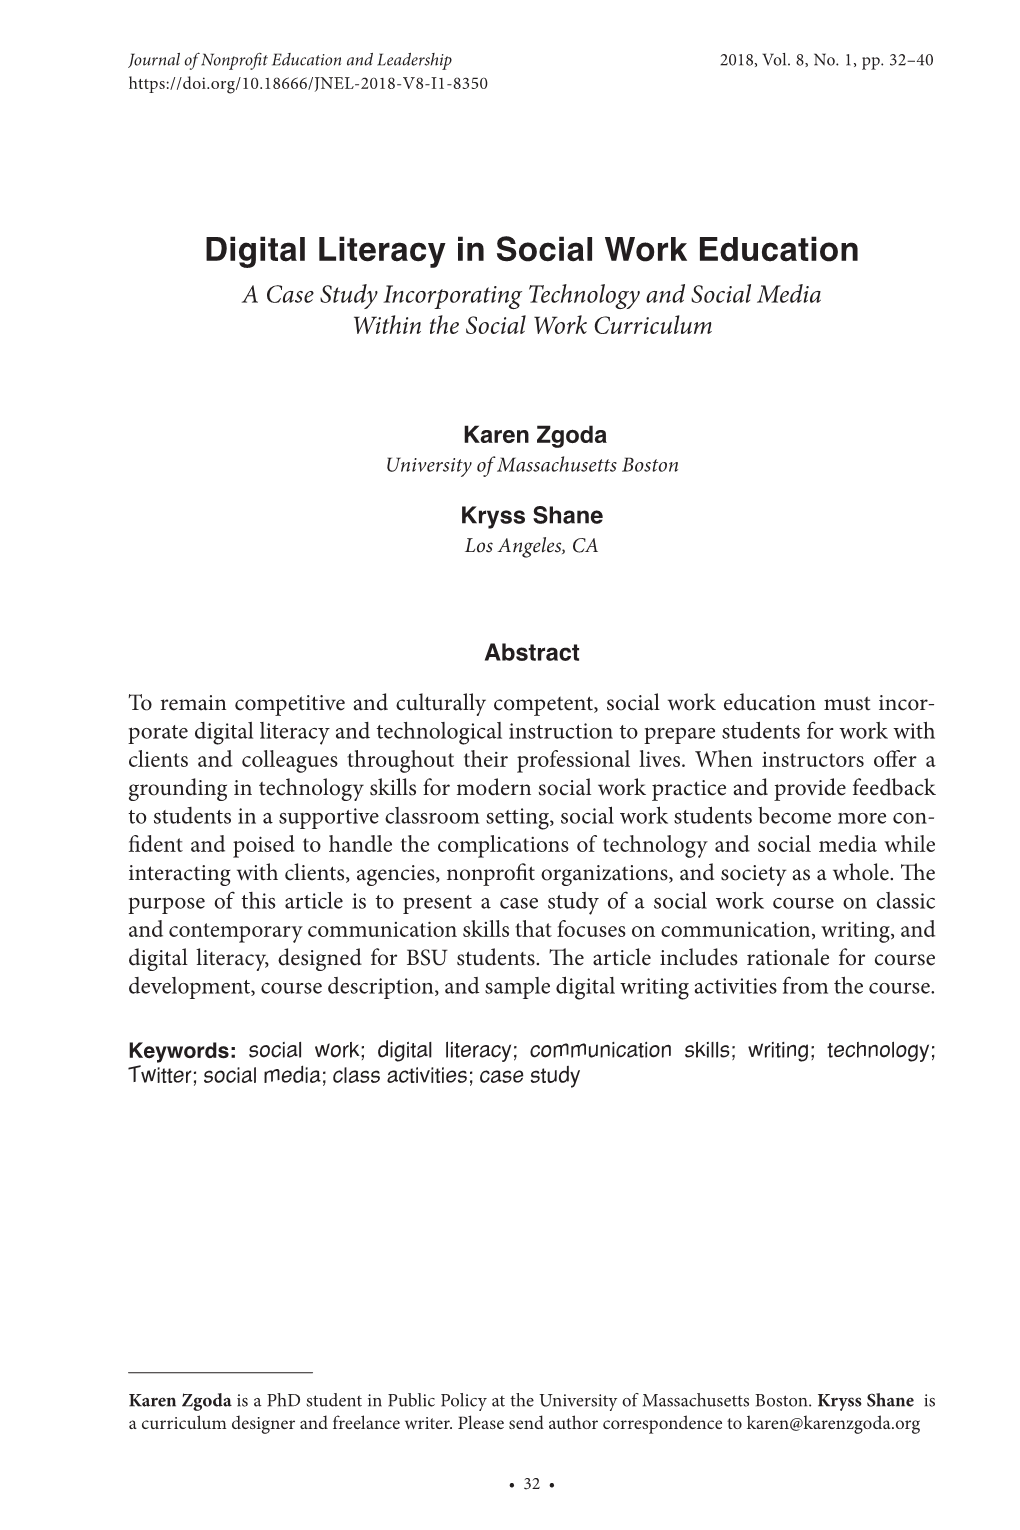 Digital Literacy in Social Work Education a Case Study Incorporating Technology and Social Media Within the Social Work Curriculum